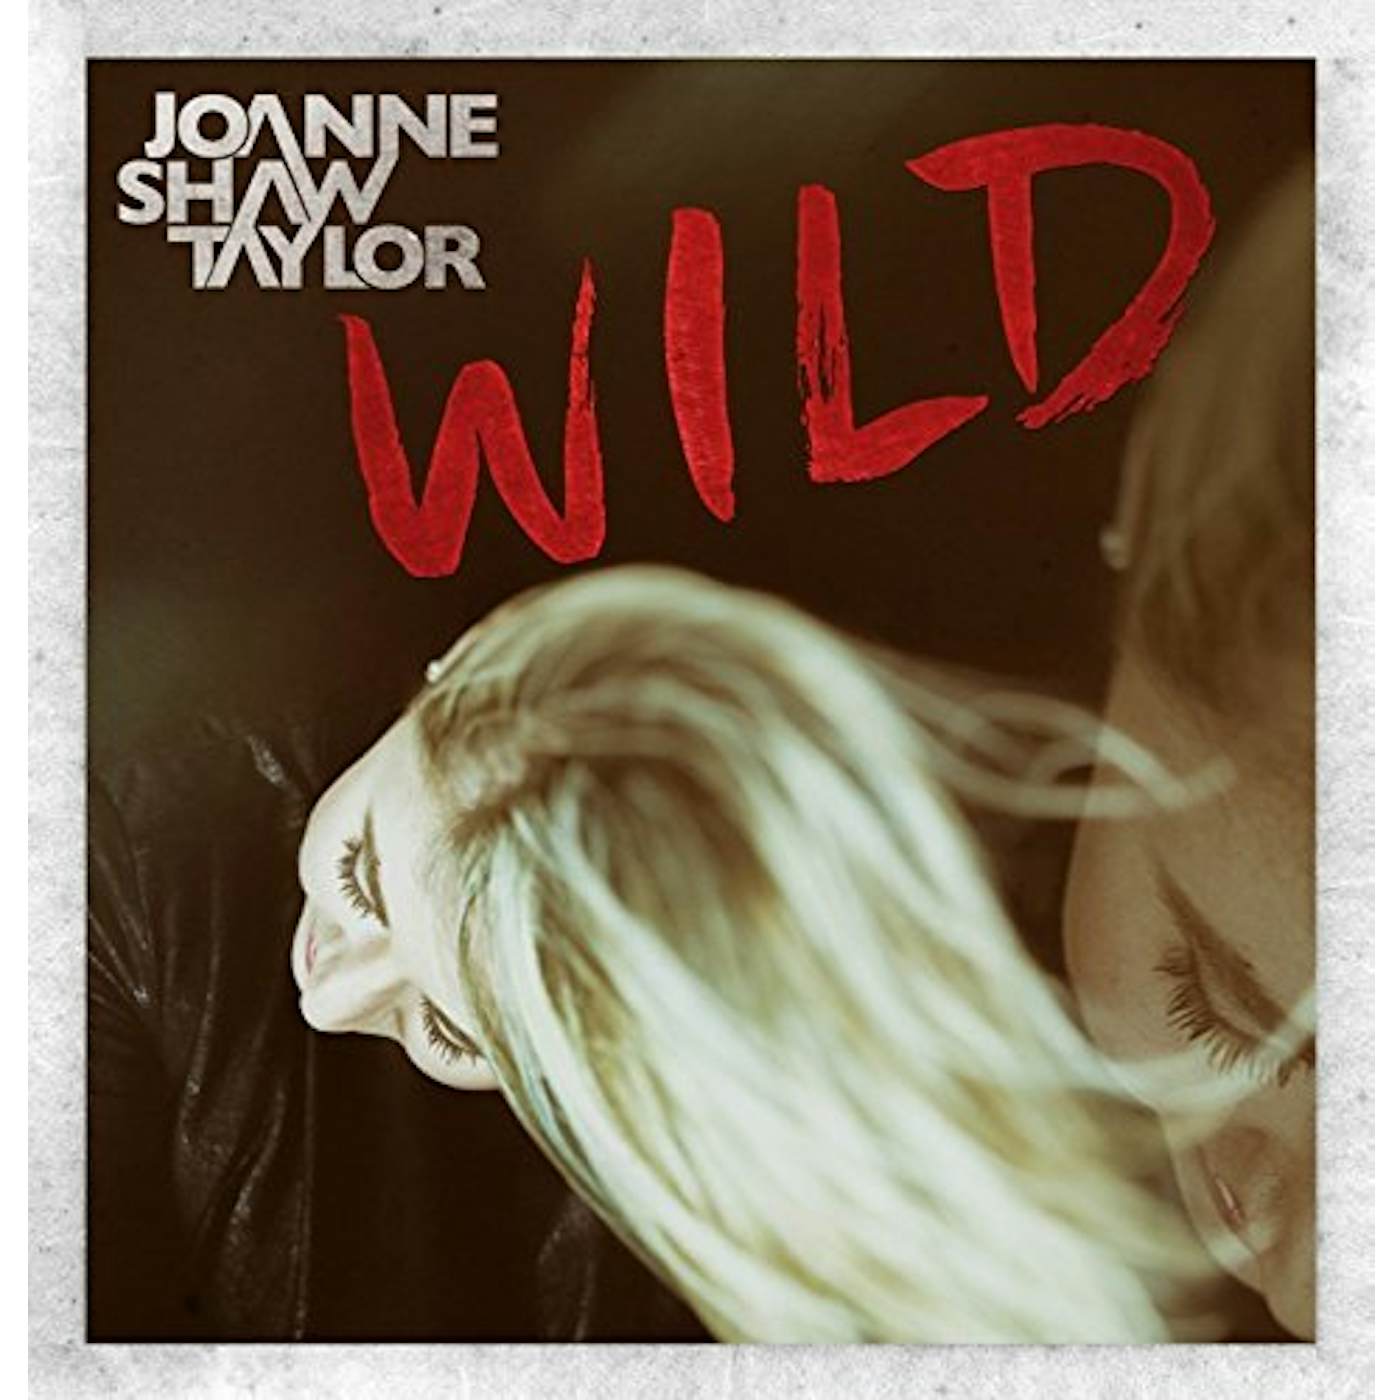 Joanne Shaw Taylor WILD: DELUXE EDITION Vinyl Record - Deluxe Edition, UK Release